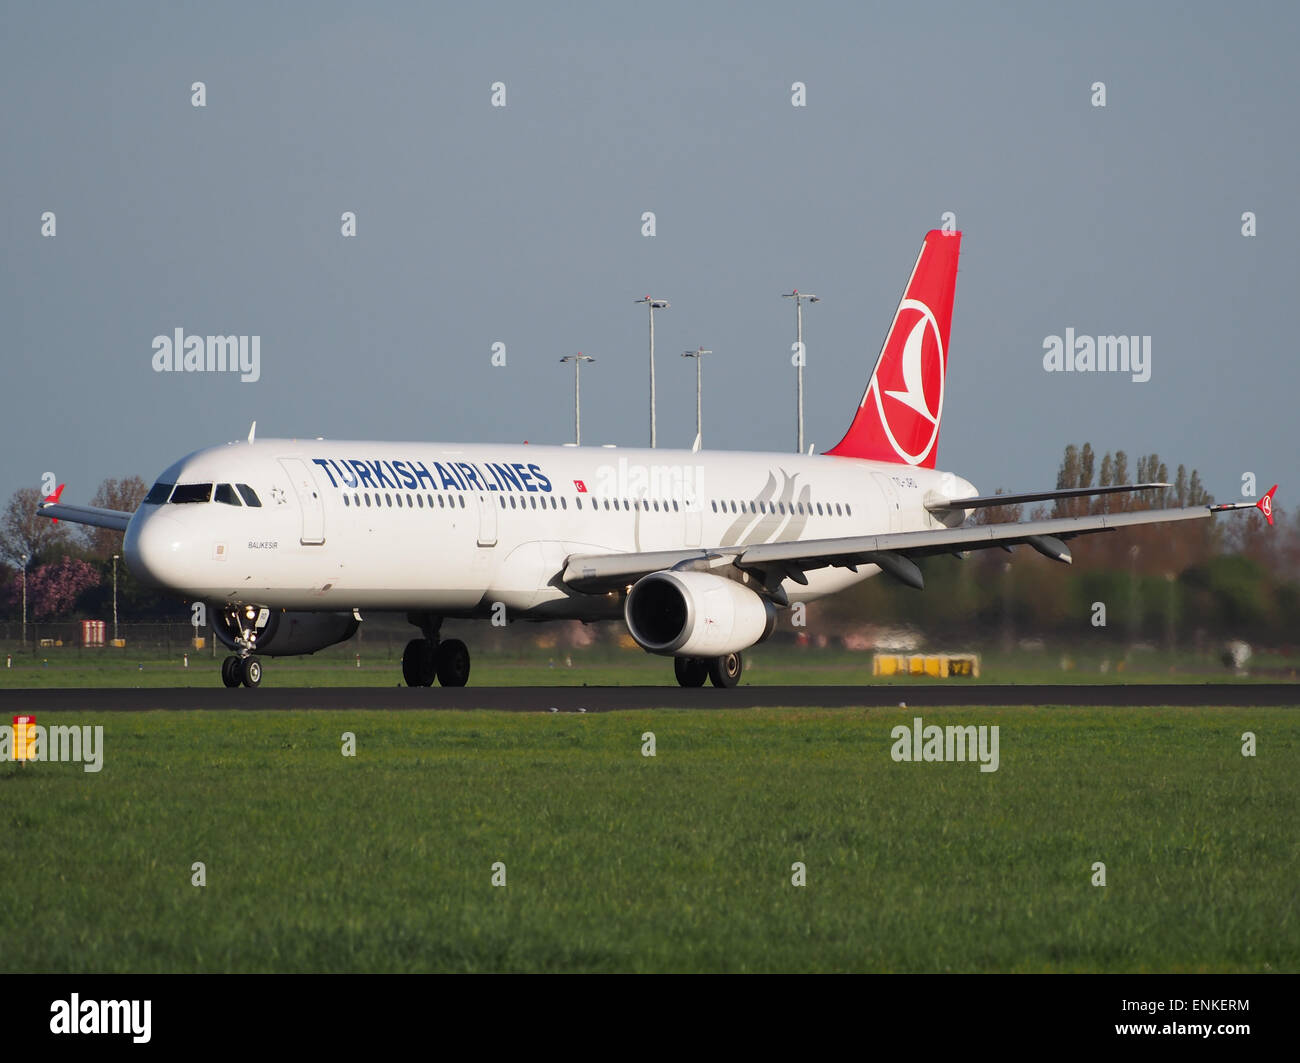 TC-JRD Turkish Airlines Airbus A321-231 - cn 3015 takeoff from Polderbaan, Schiphol (AMS - EHAM) at sunset, Stock Photo